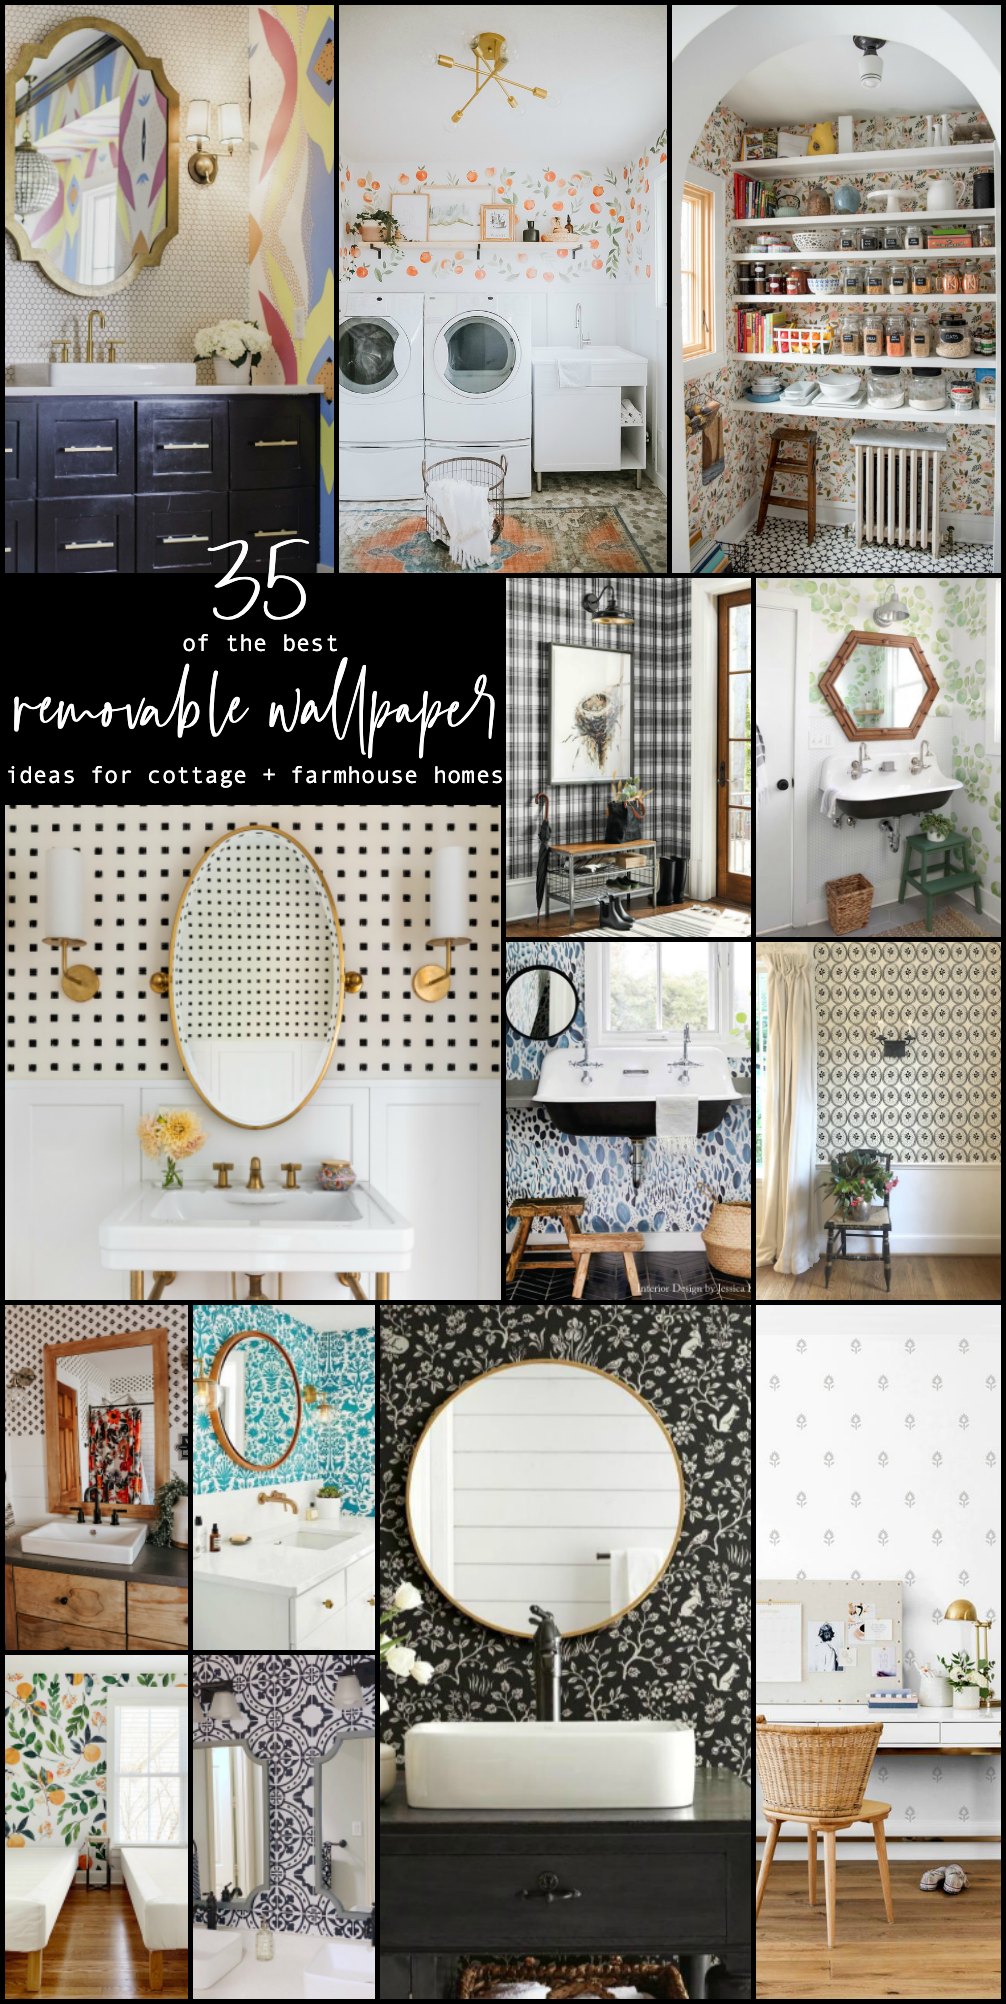 35 Removable Wallpaper Ideas for Cottage and Farmhouse Homes